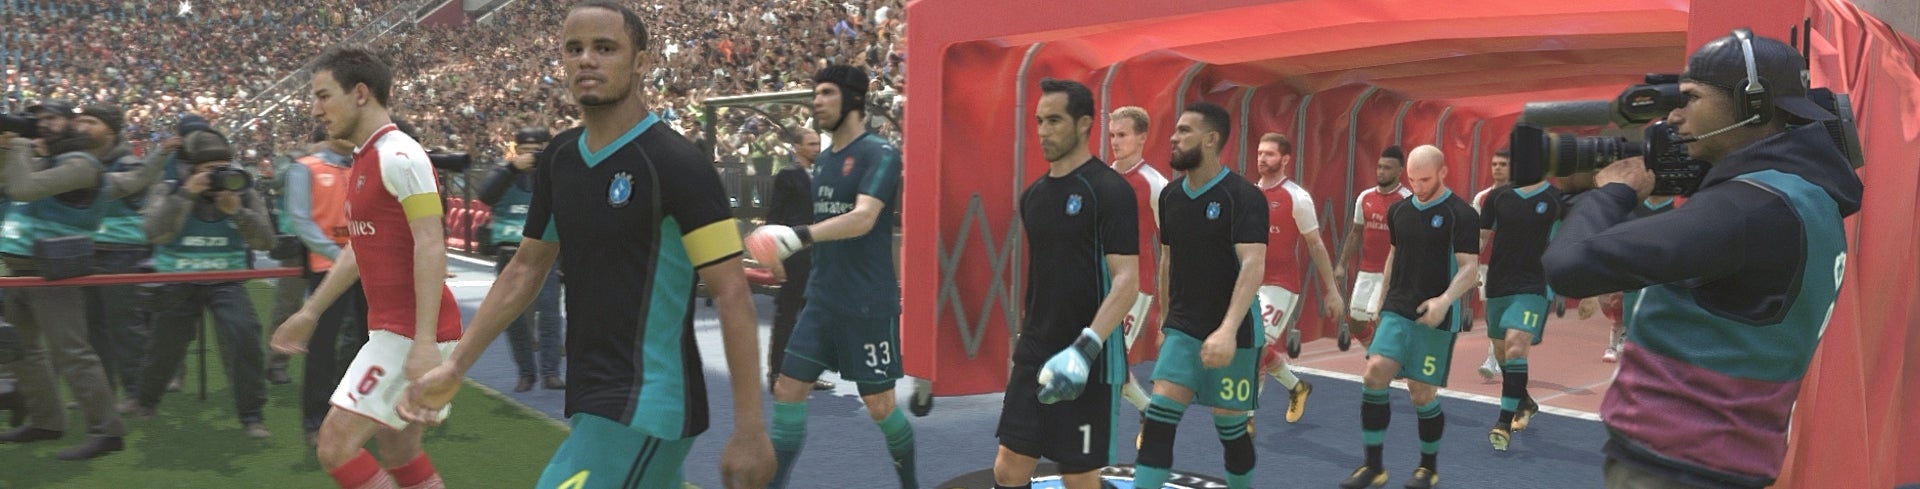 Image for PES 2018 review